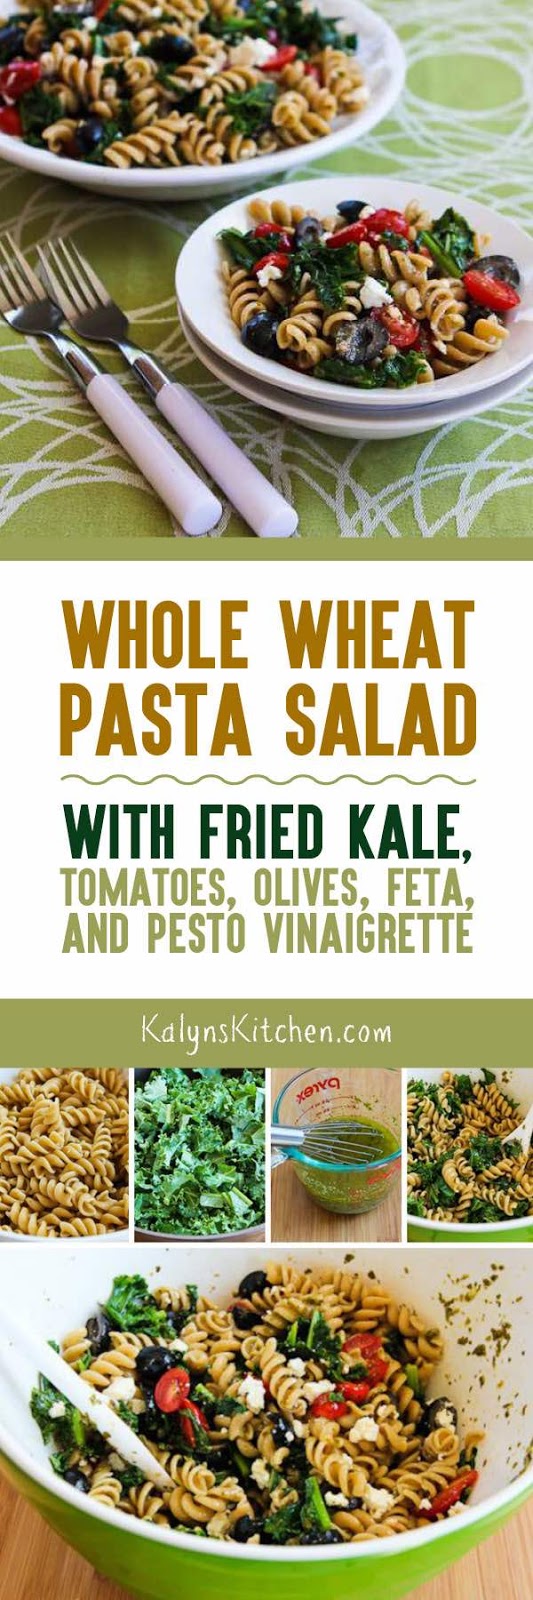 Whole Wheat Pasta Salad with Fried Kale, Tomatoes, Olives, Feta, and ...